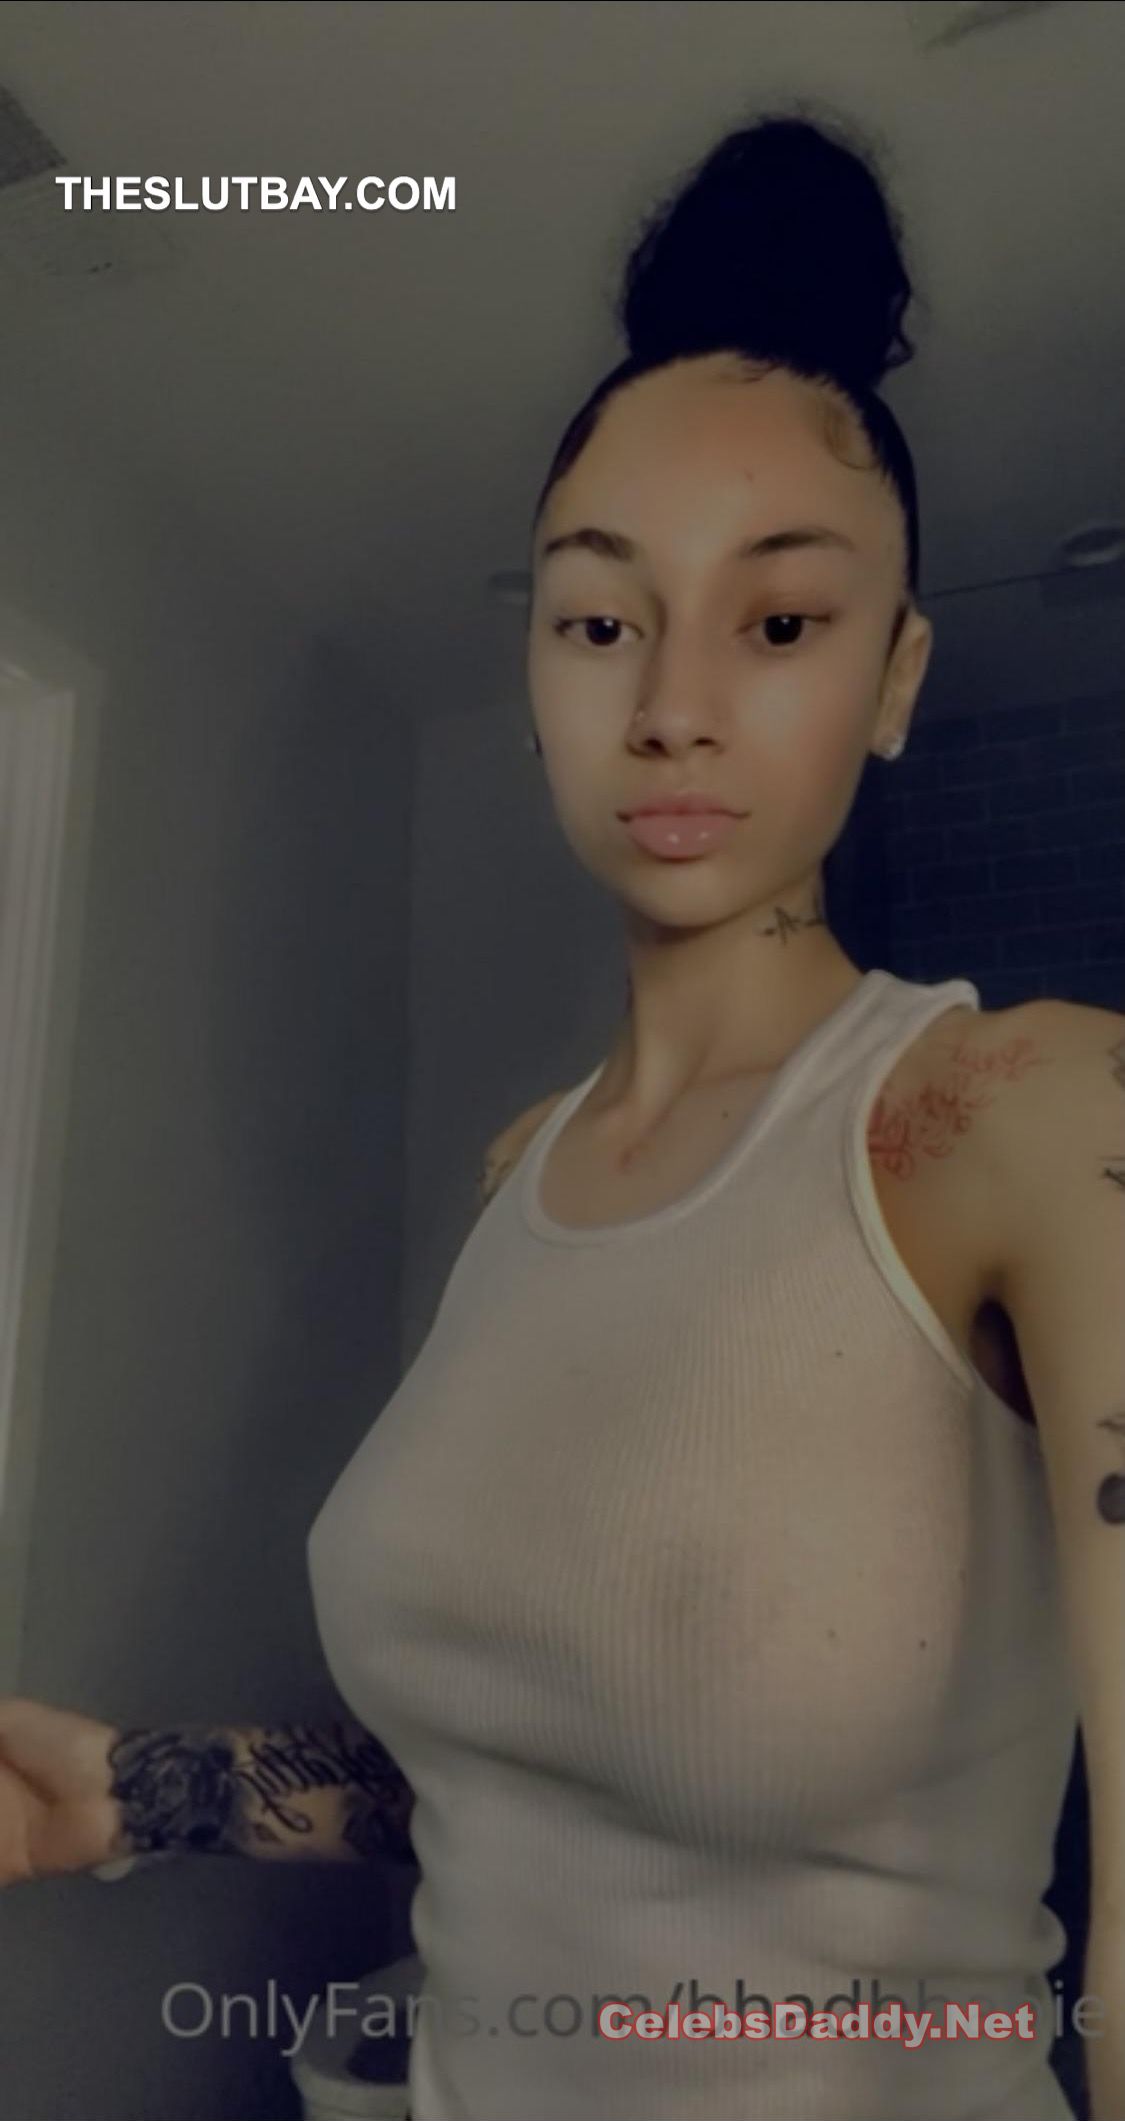 Bhad bhabie onlyfans tits